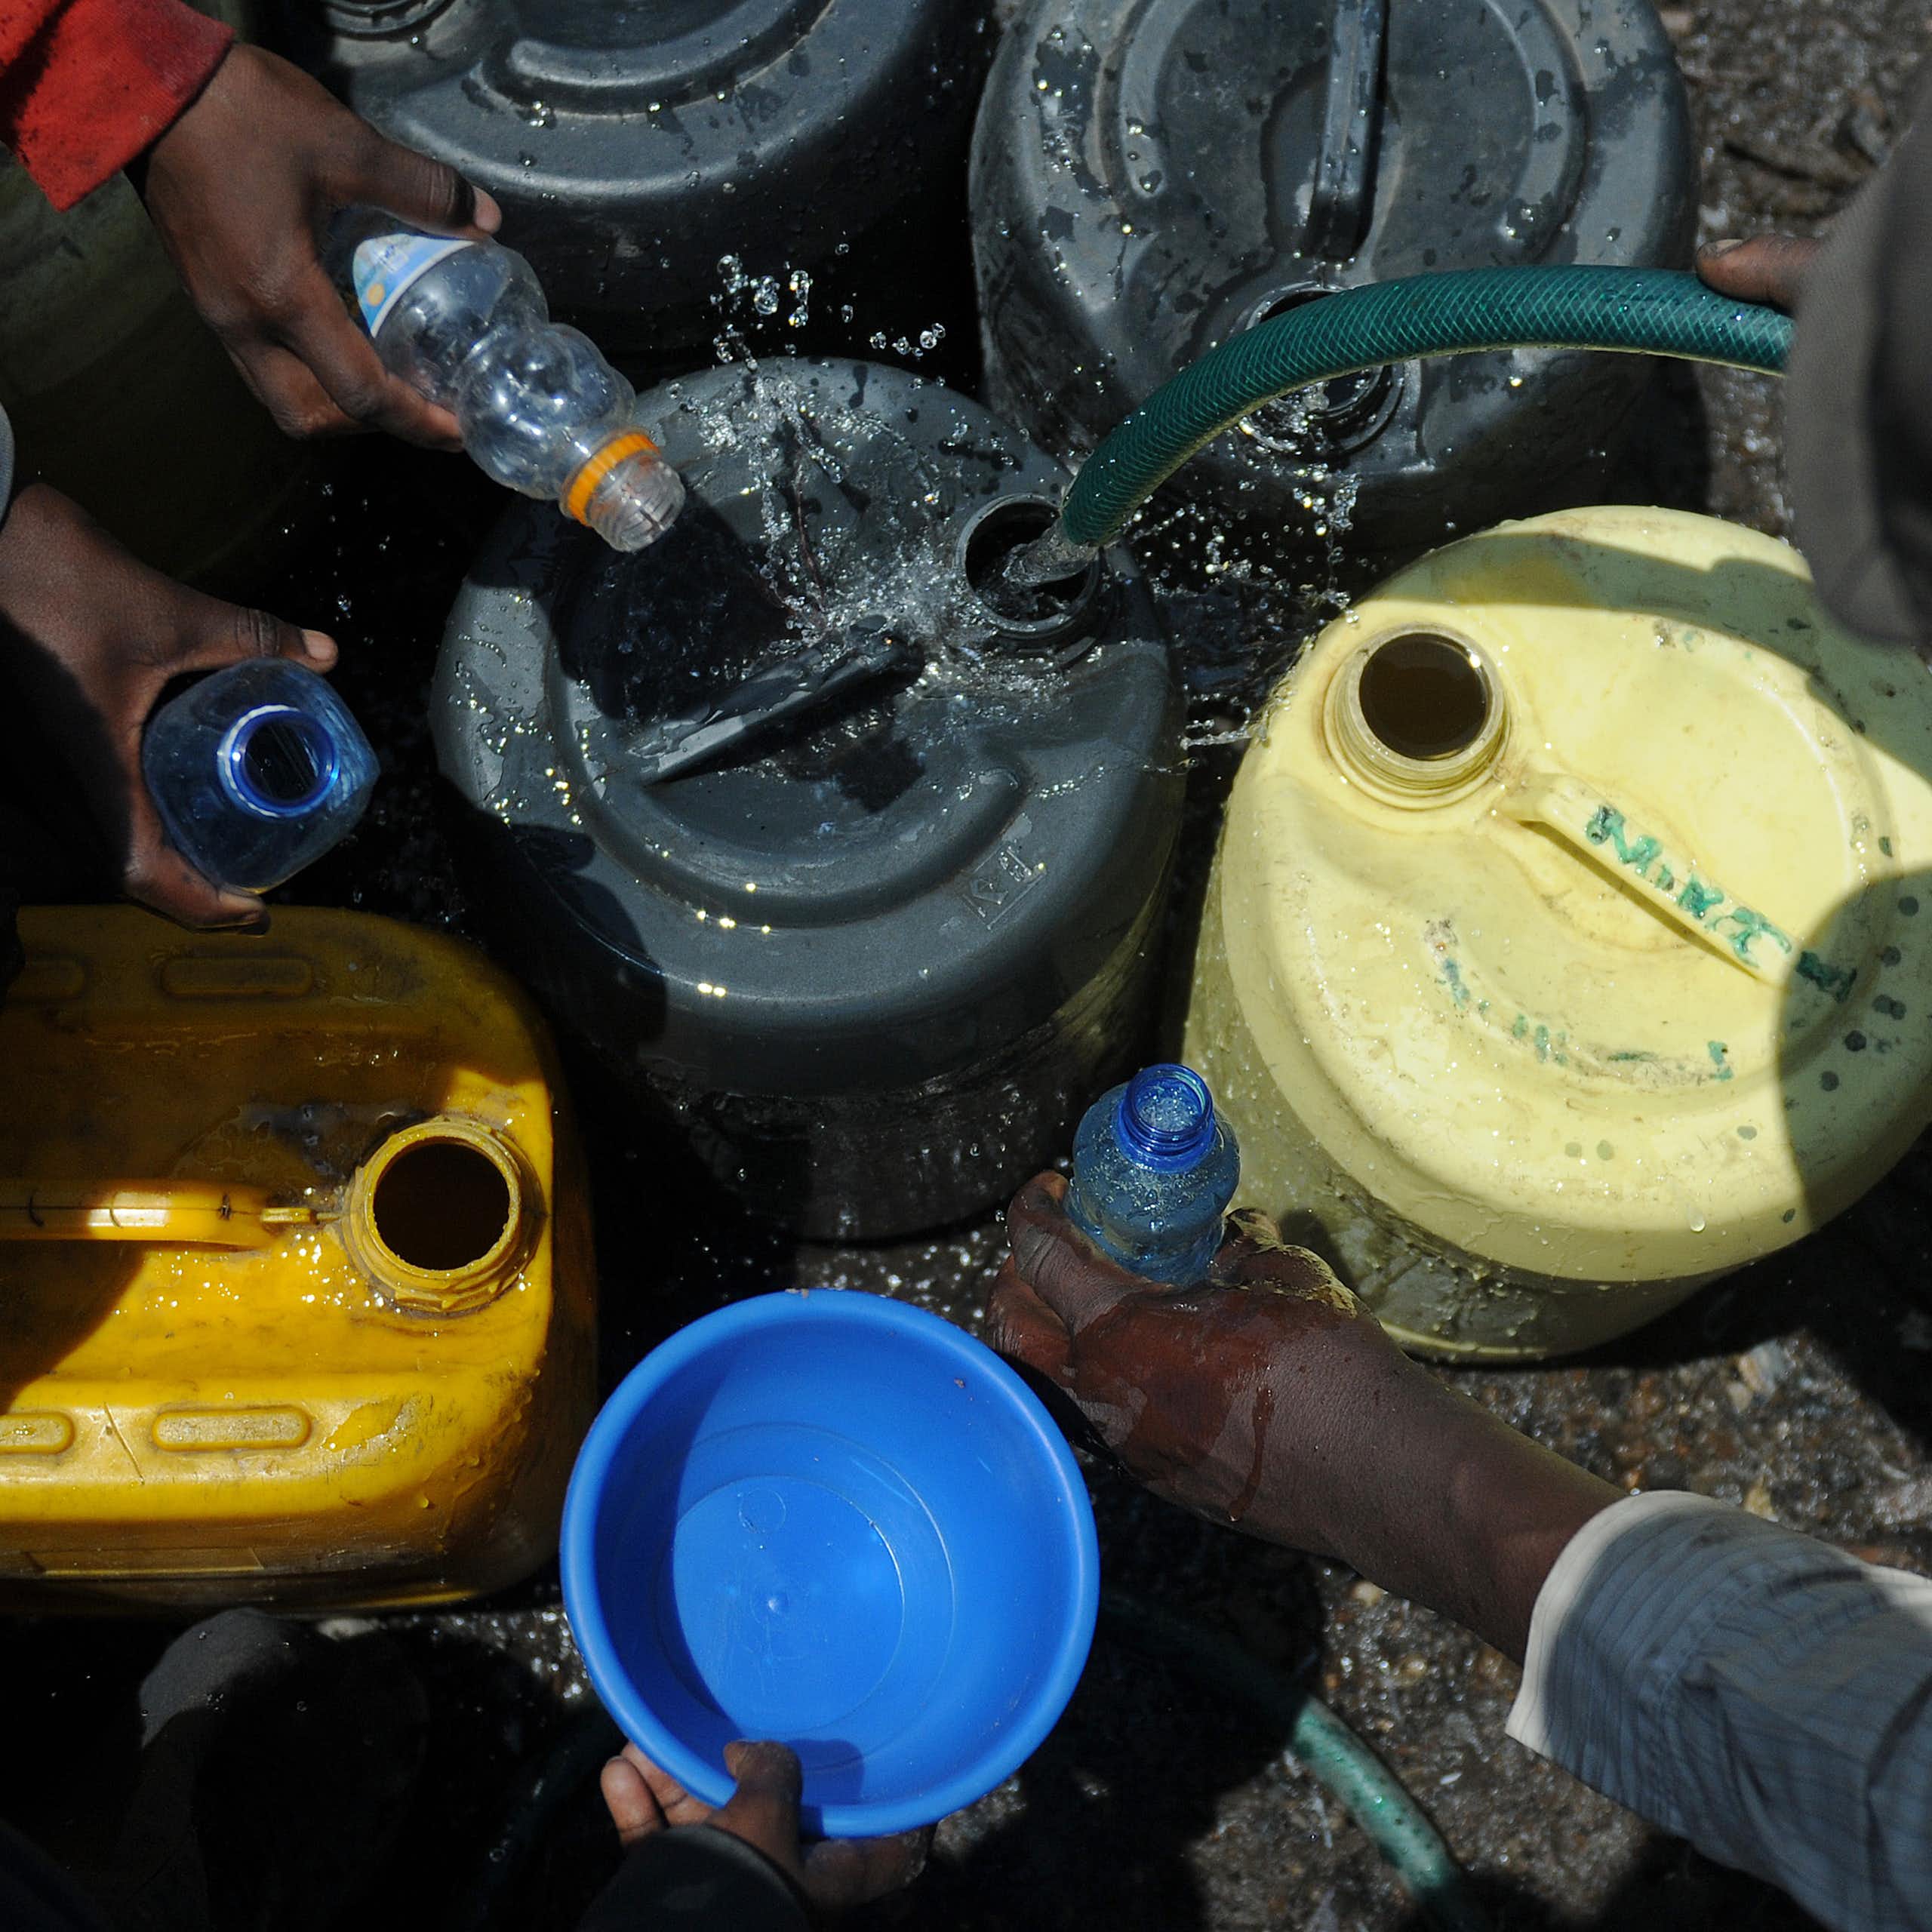 Residents fetch water in small bottles 